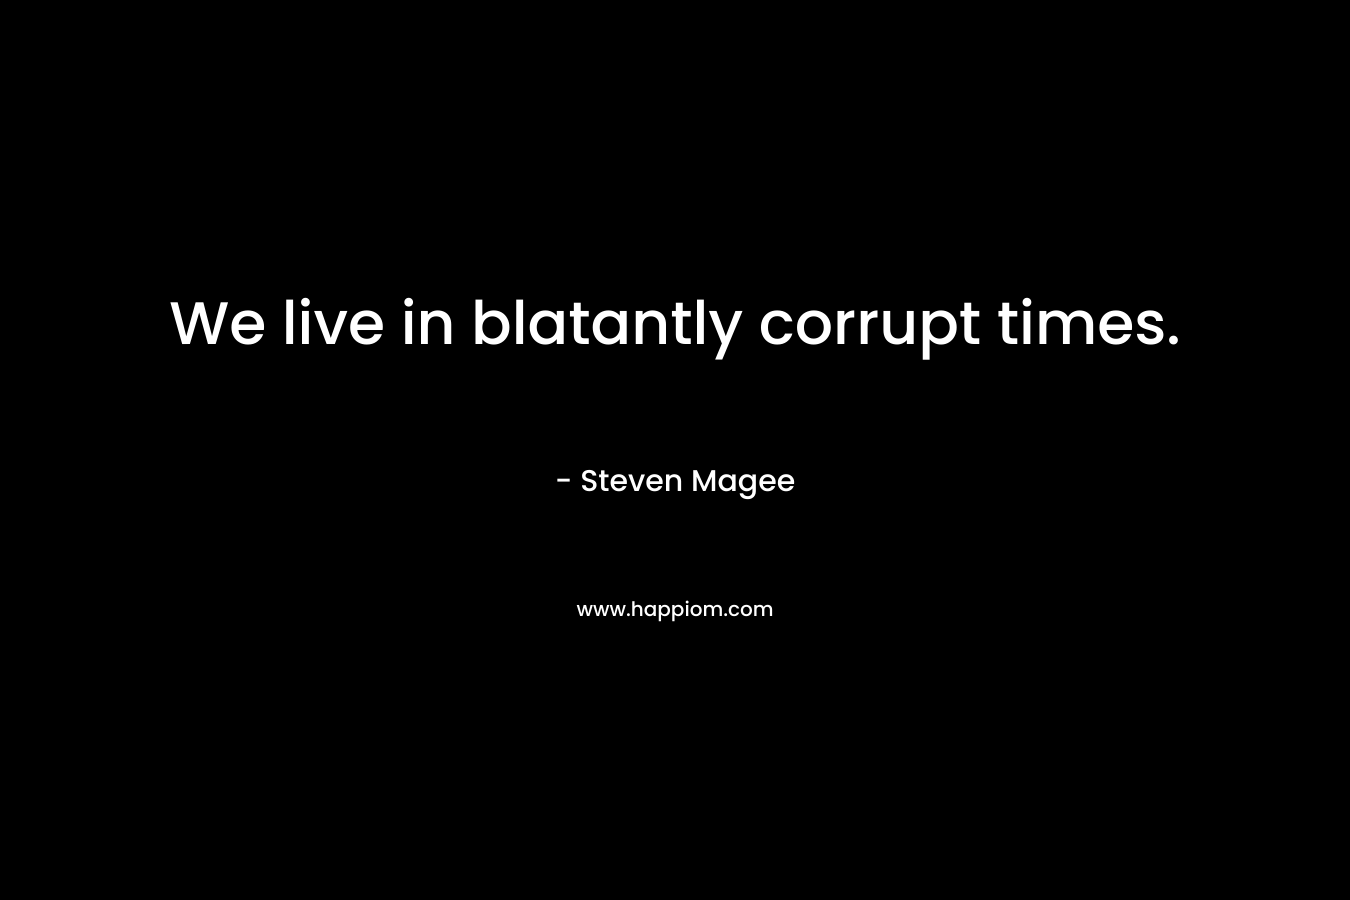 We live in blatantly corrupt times. – Steven Magee